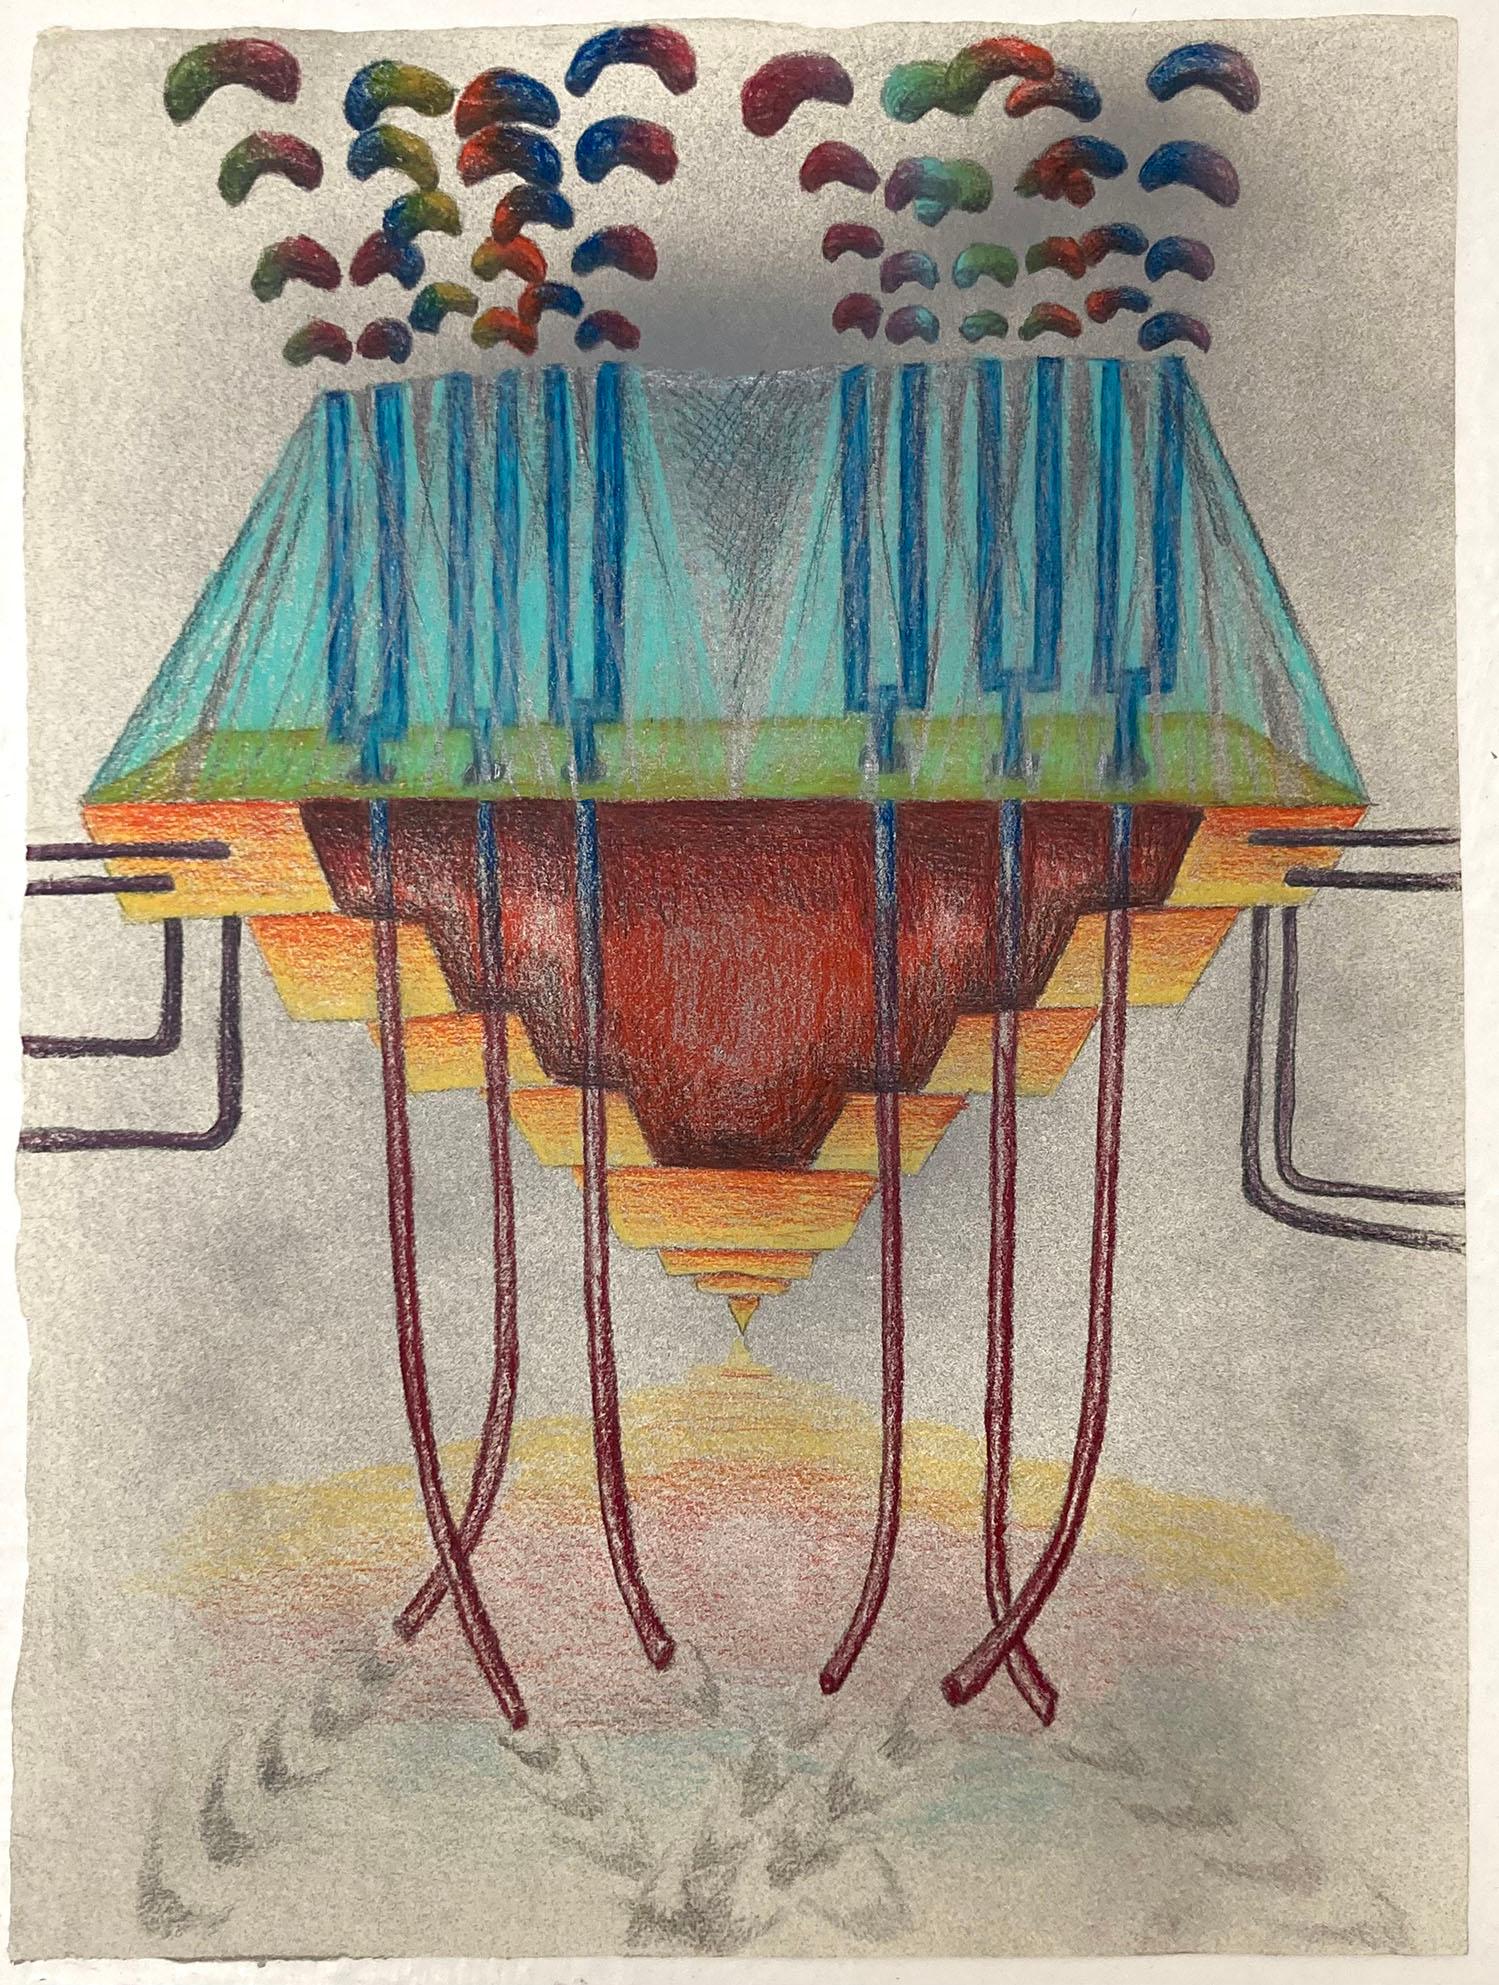 Rita Evans Abstract Drawing - 'SIGNAL MACHINE', 2020 Colour pencil, spray paint and graphite on handmade paper